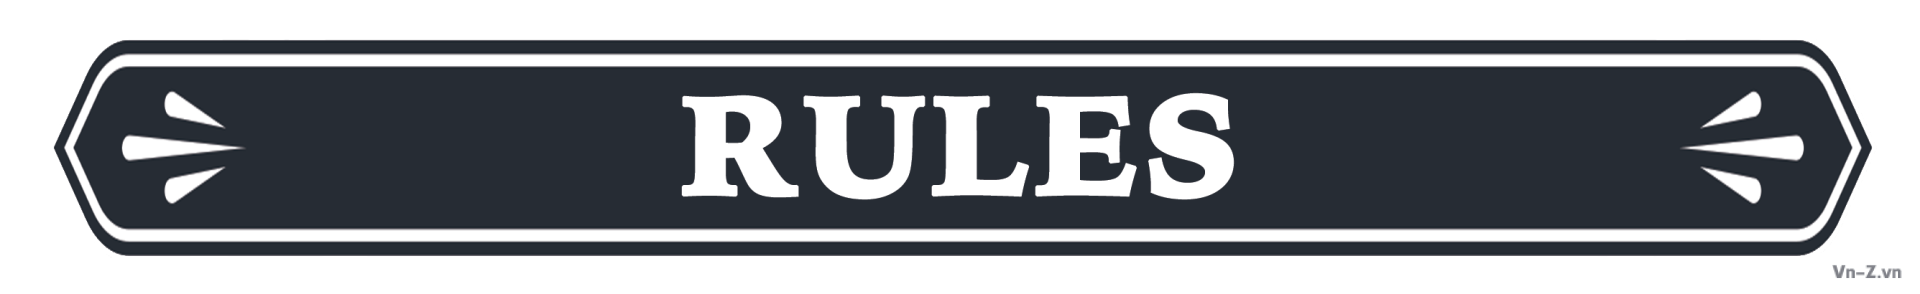 banner-rules.png